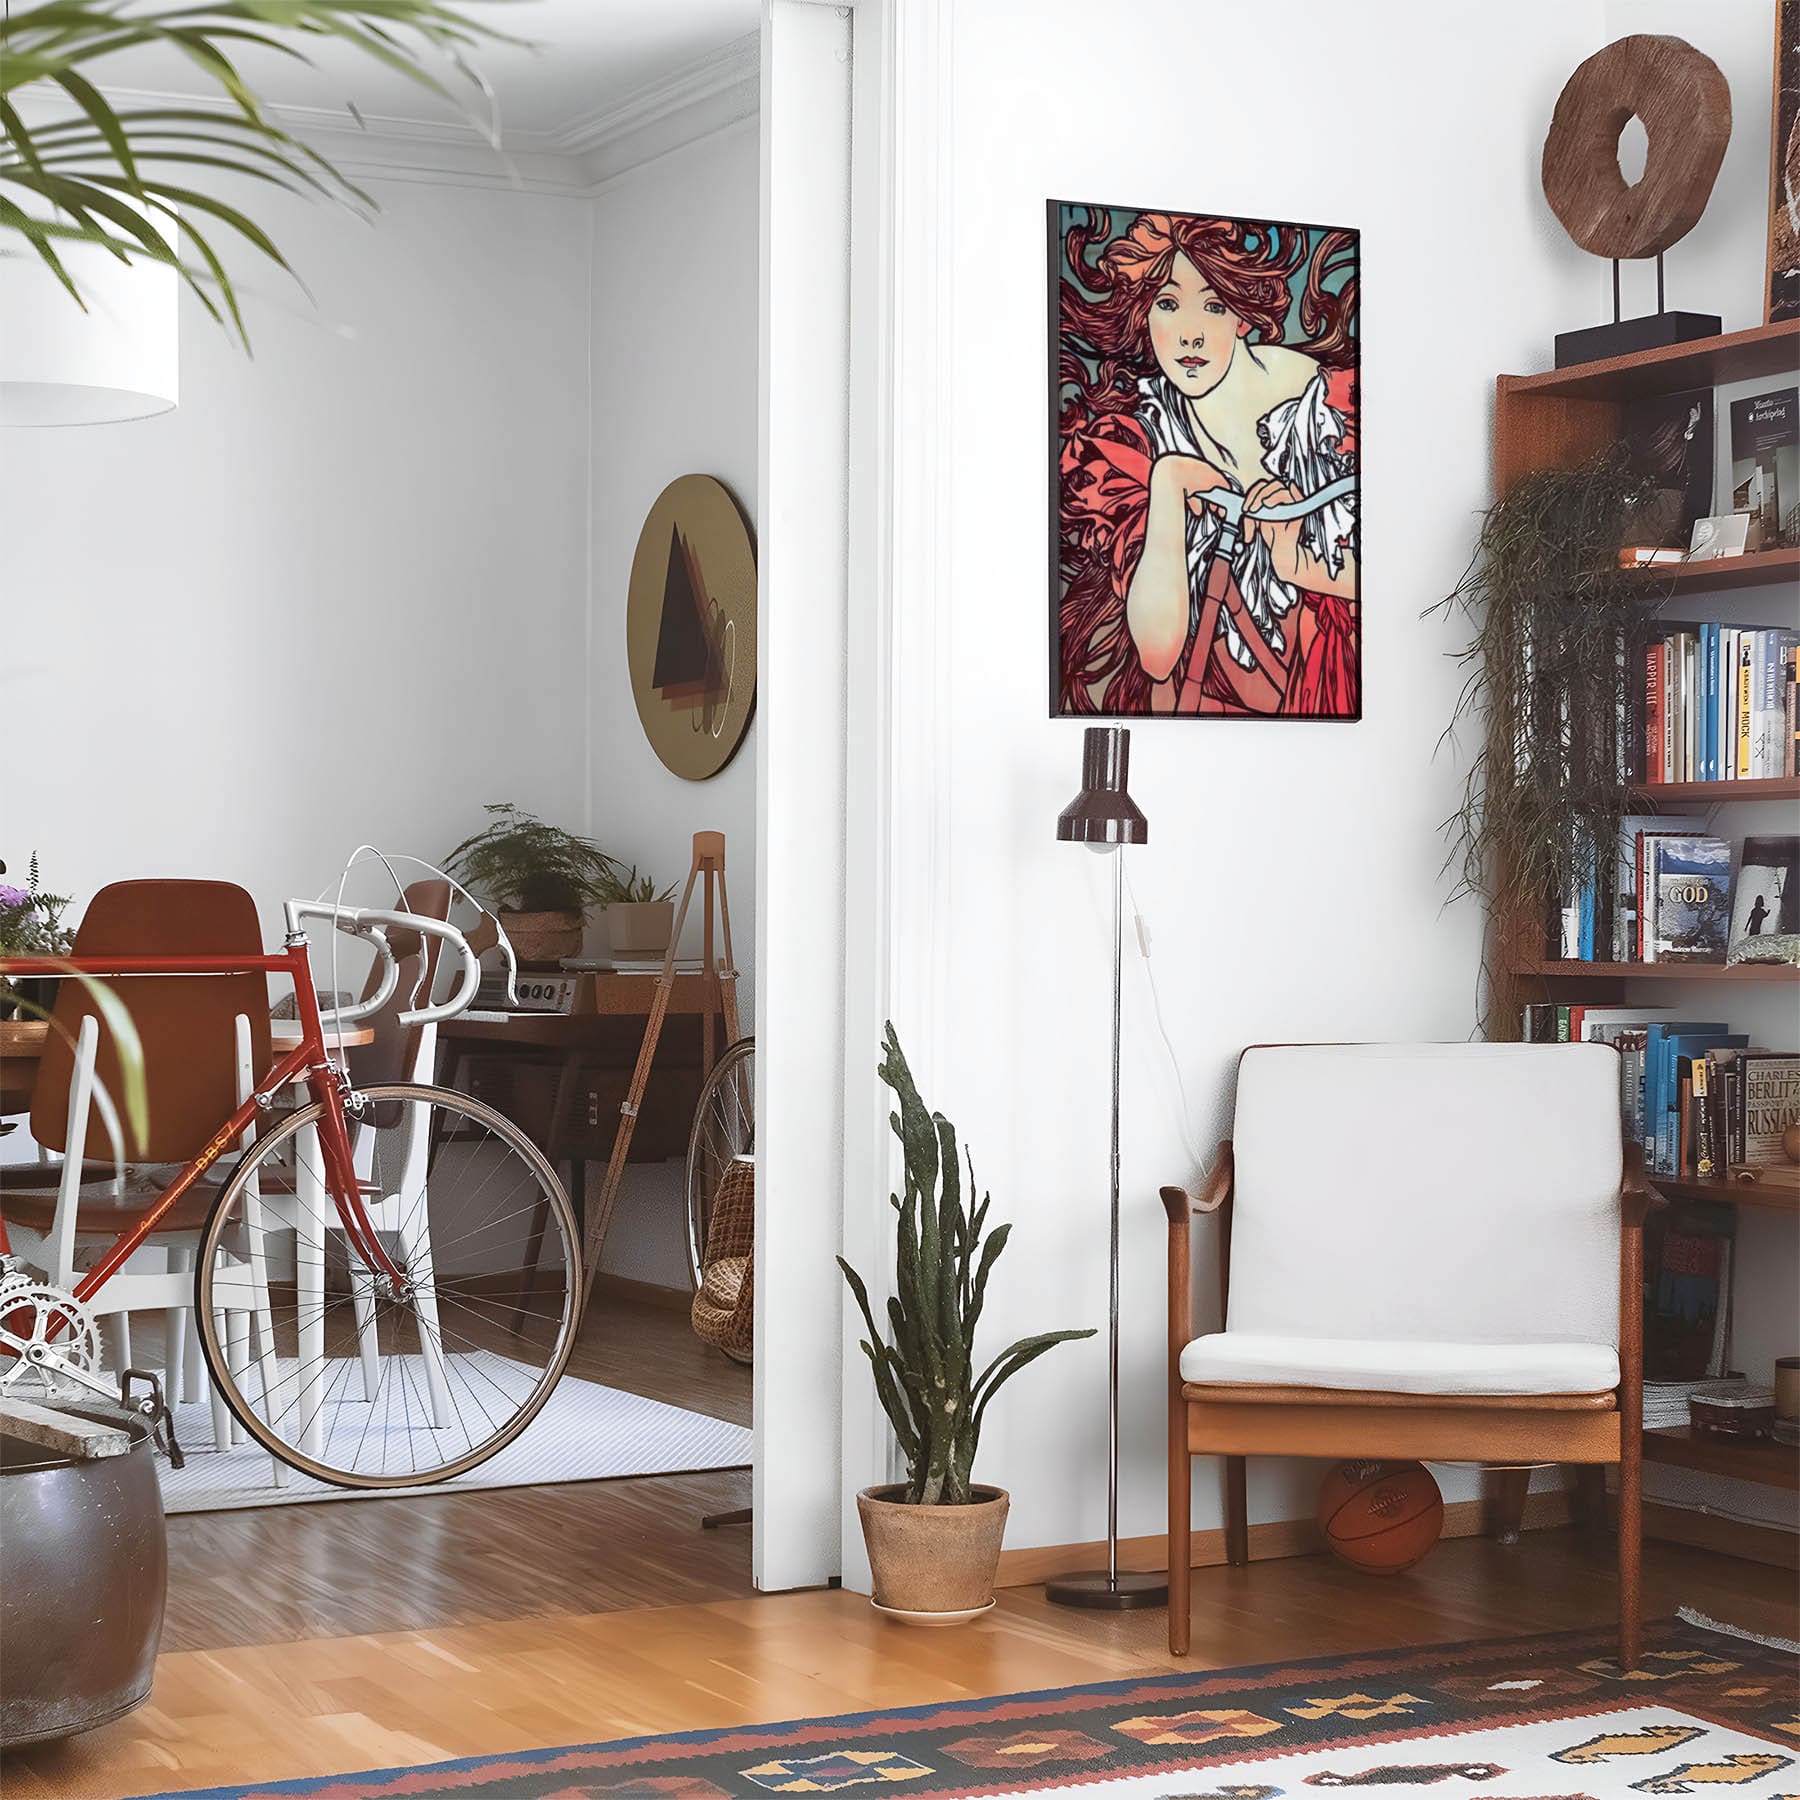 Eclectic living room with a road bike, bookshelf and house plants that features framed artwork of a Woman with Flowing Red Hair on a Bicycle above a chair and lamp